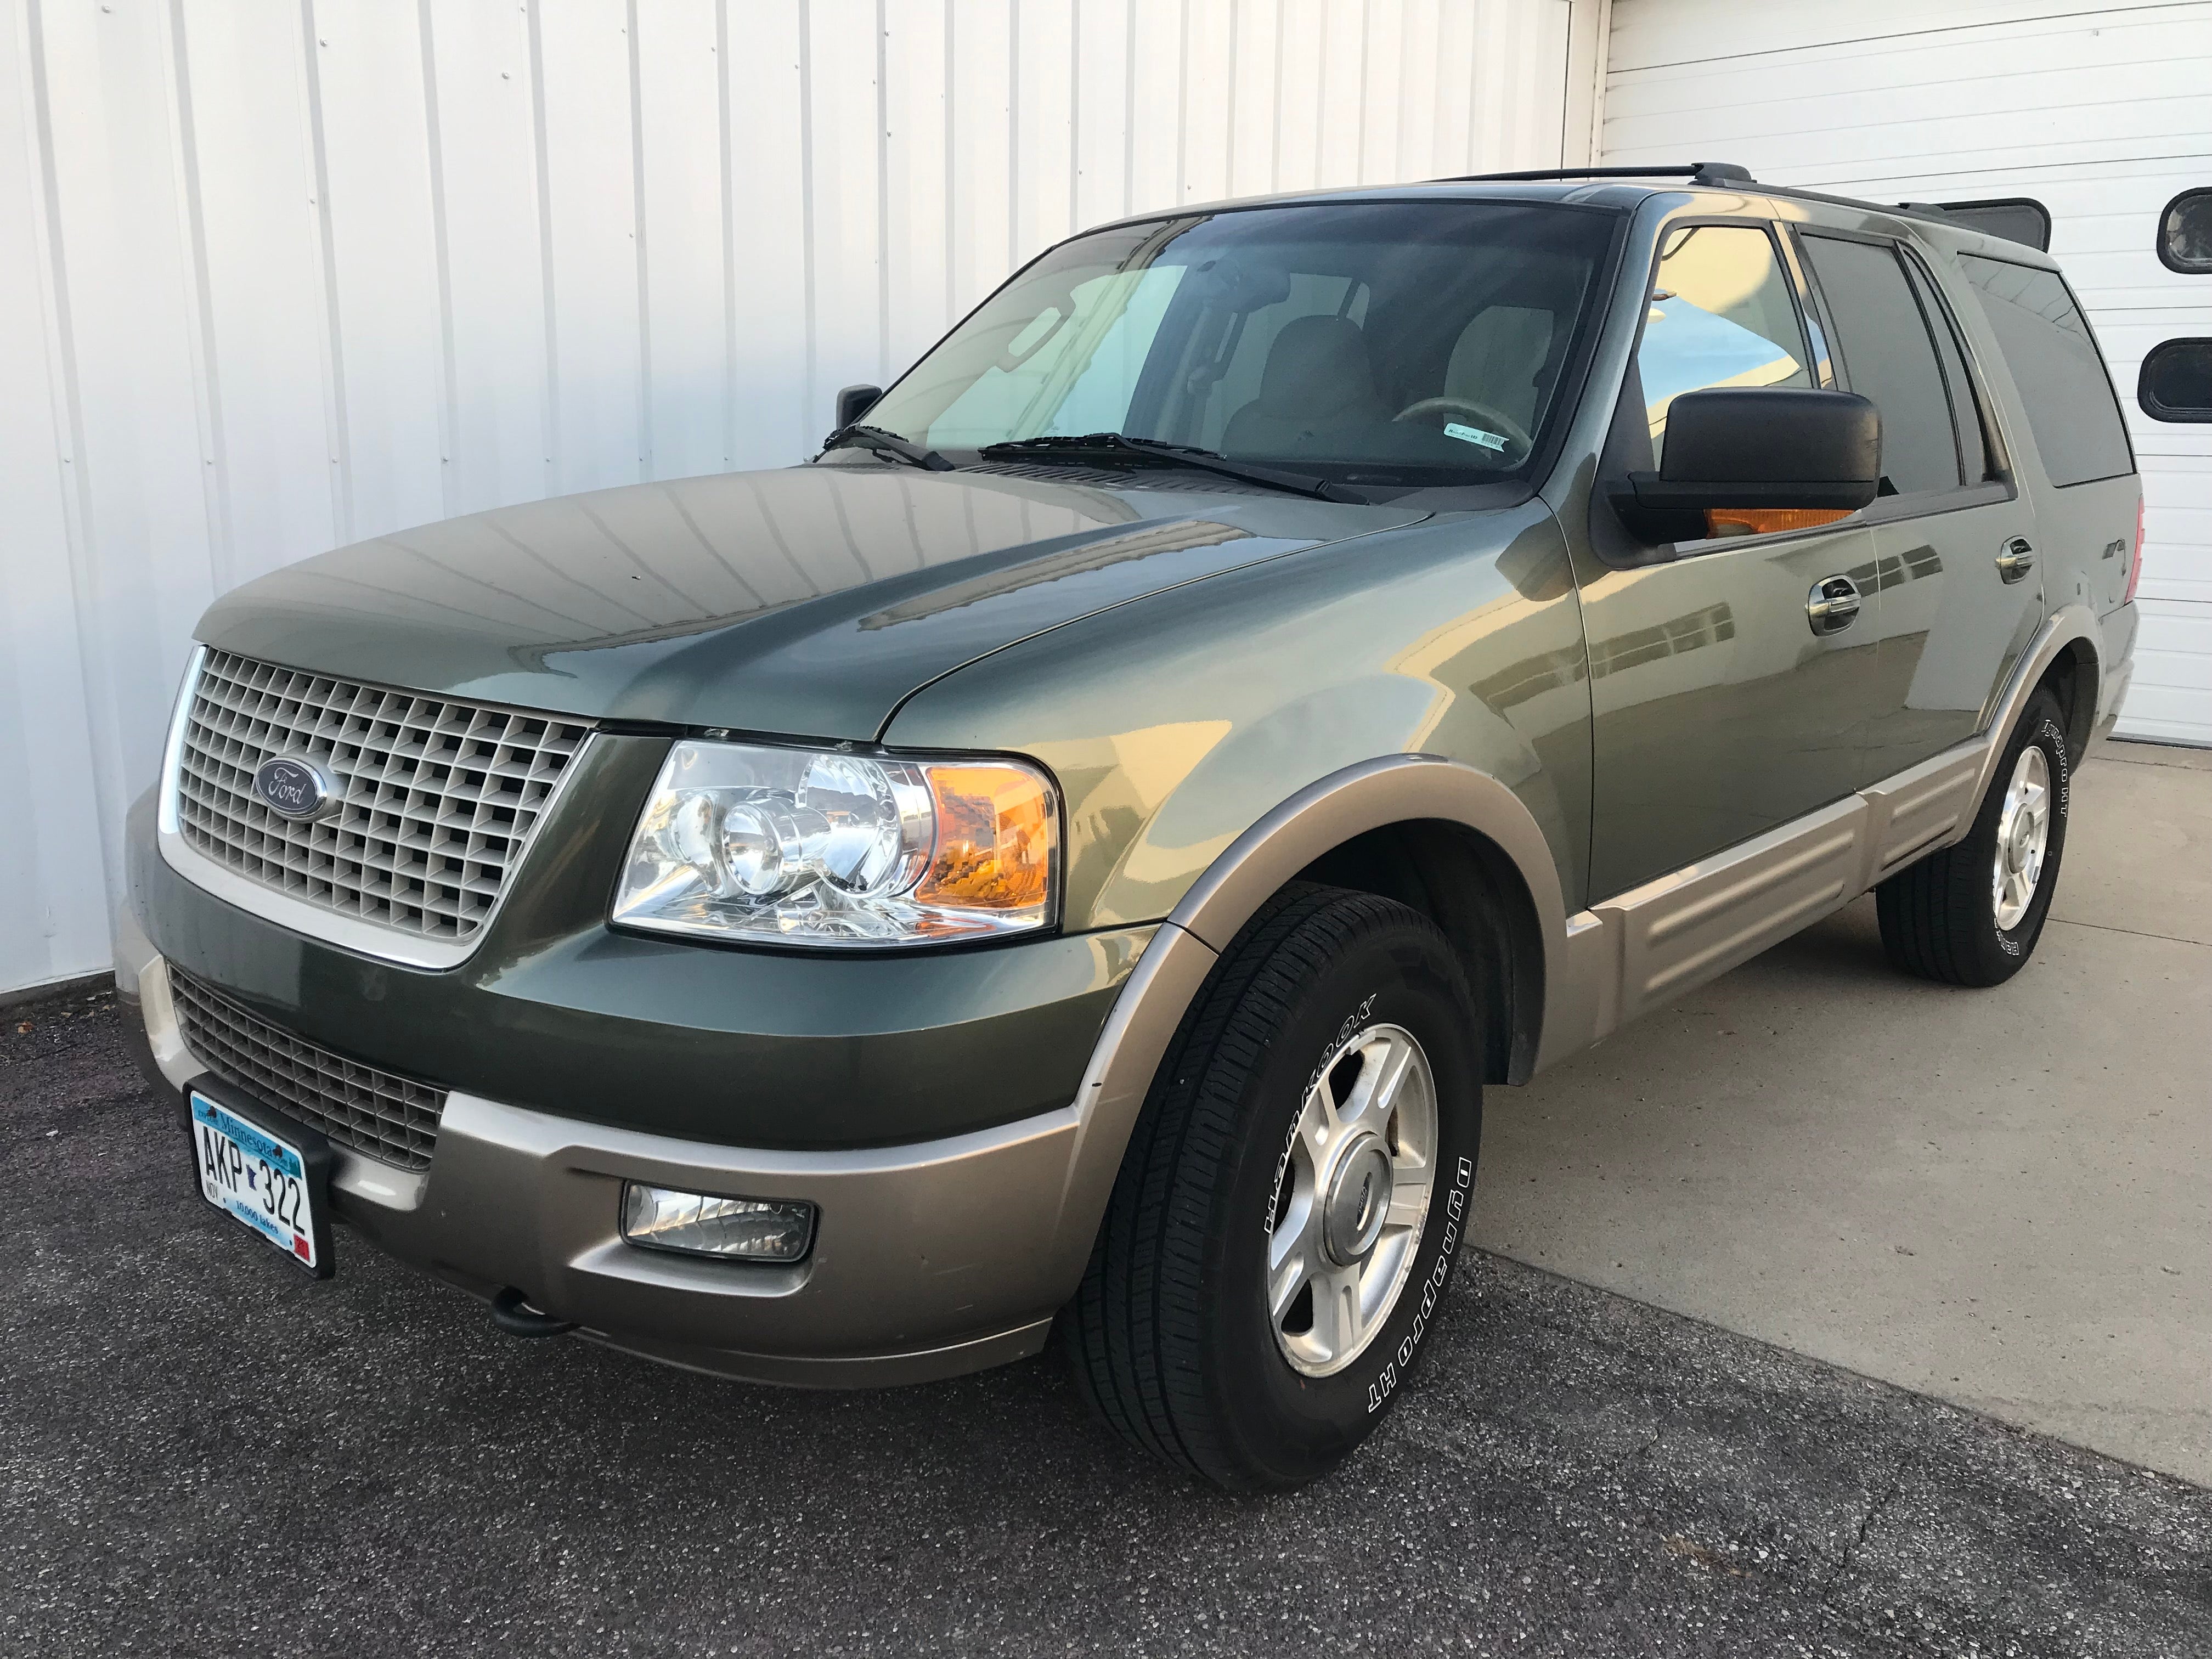 Used 2004 Ford Expedition Eddie Bauer with VIN 1FMFU18L34LA71440 for sale in Arlington, Minnesota